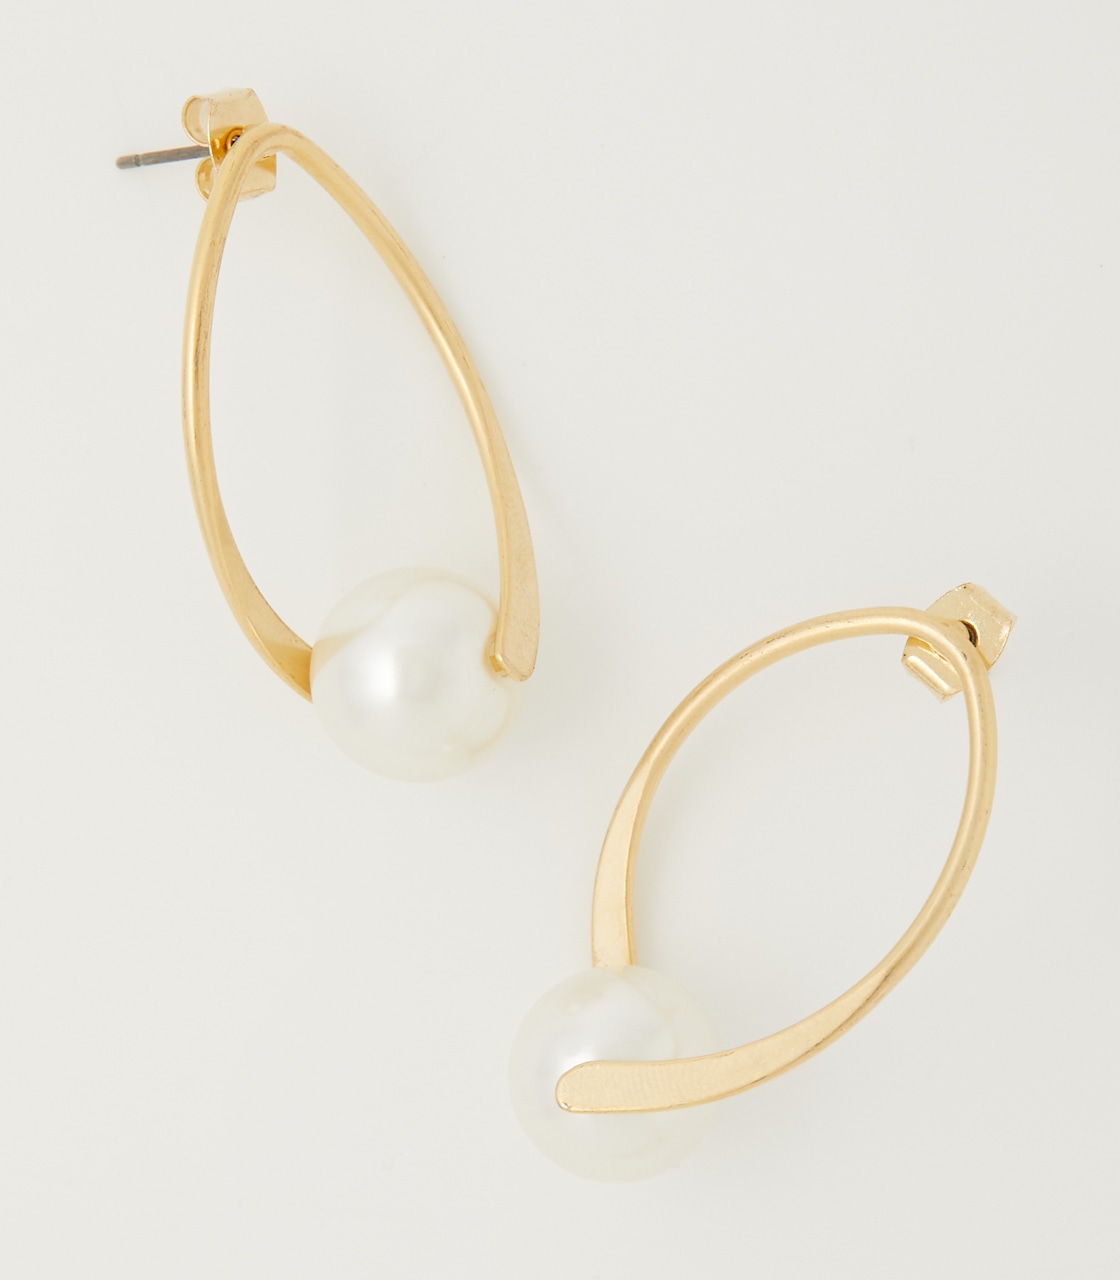 WRAPPED PEARL EARRINGS/ラップパールピアス 詳細画像 L/GLD 3